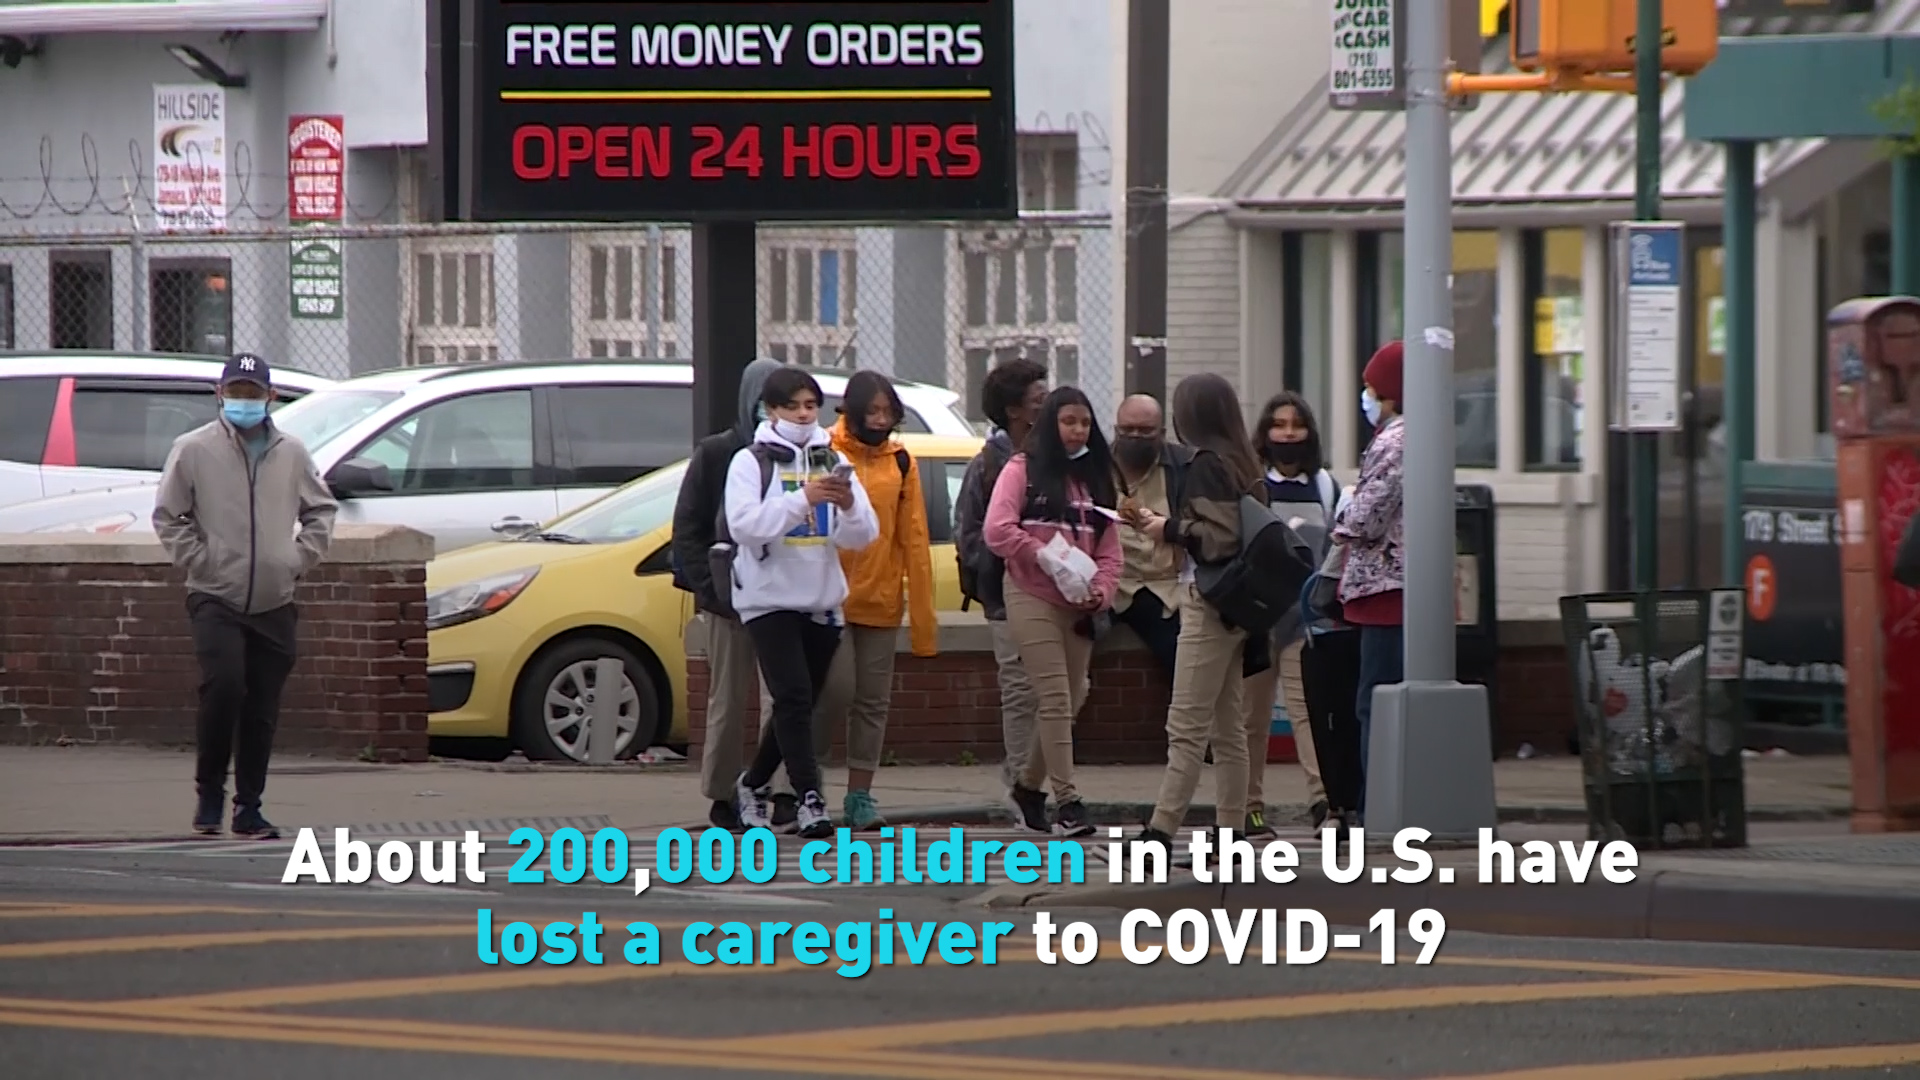 About 200,000 children in the U.S. have lost a caregiver to COVID-19